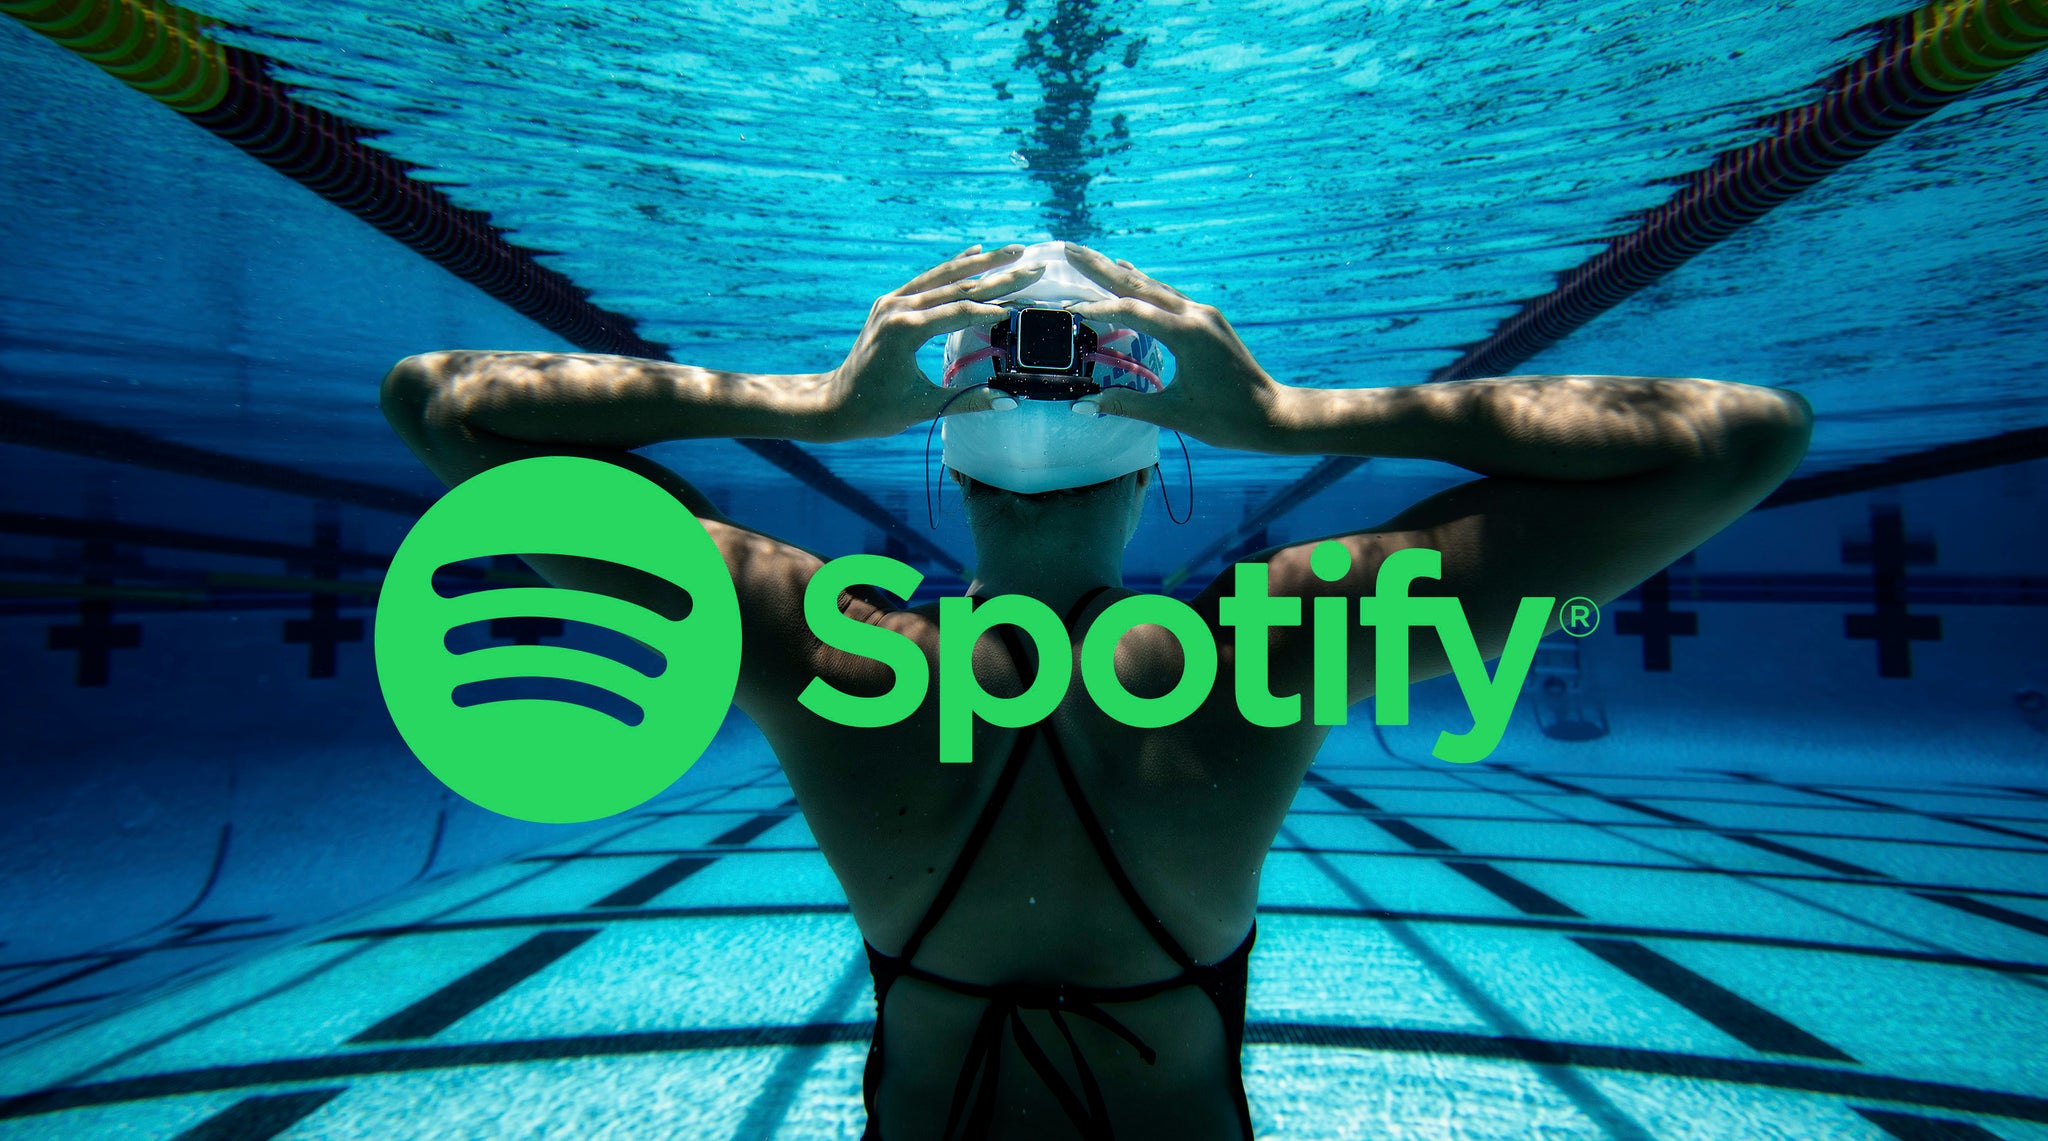 Listen to streaming music while swimming - Spotify, Apple Music, and others